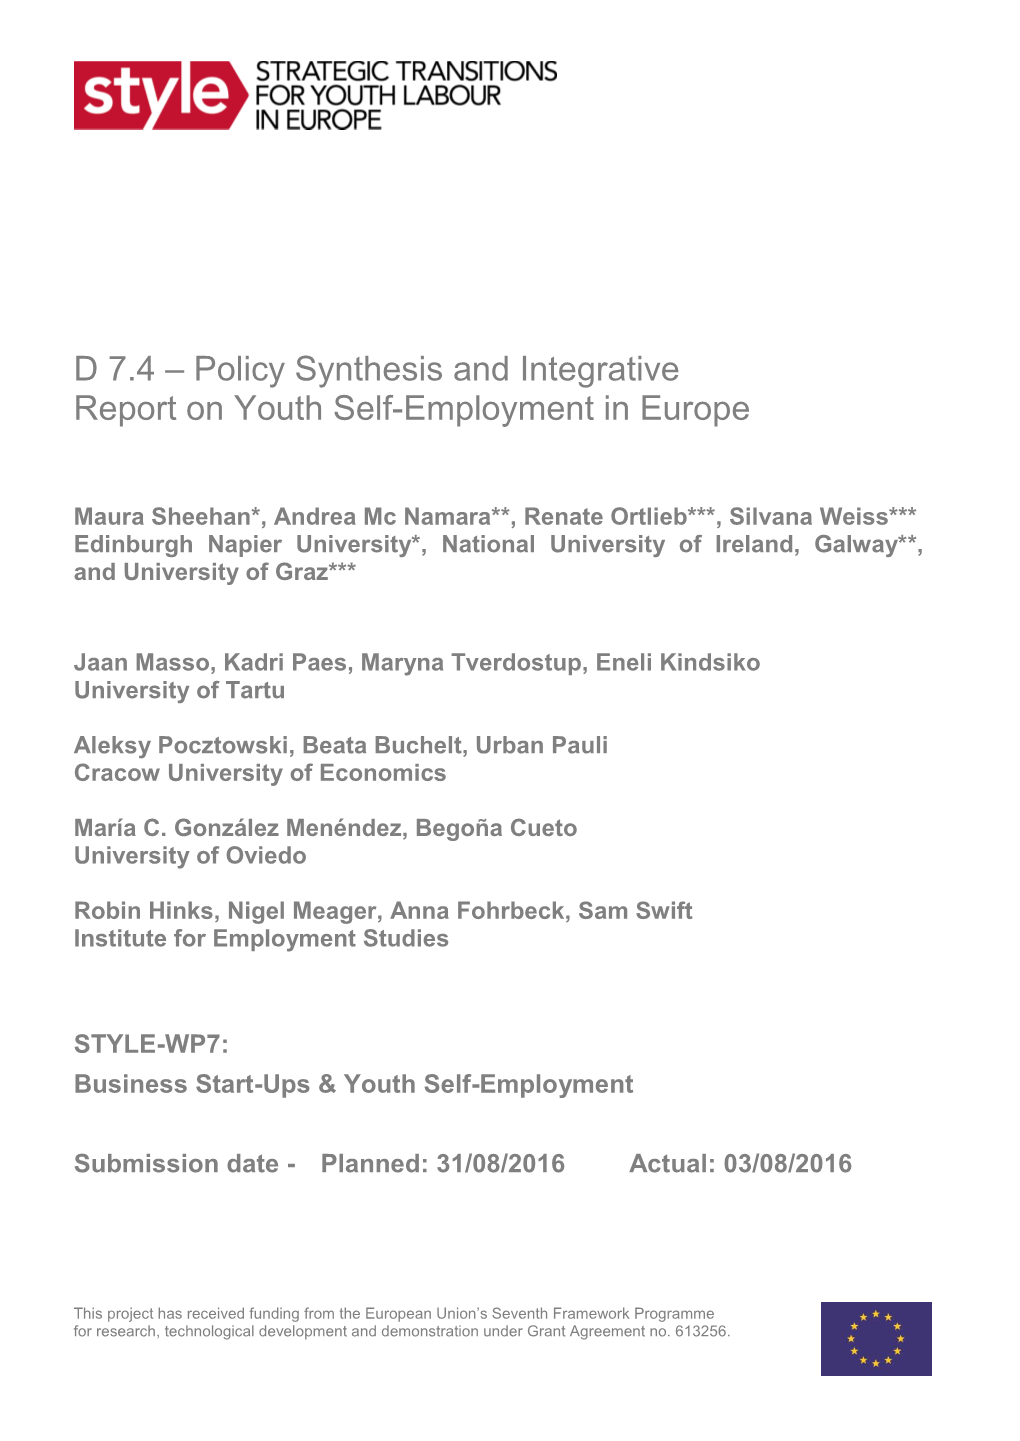 D 7.4 – Policy Synthesis and Integrative Report on Youth Self-Employment in Europe